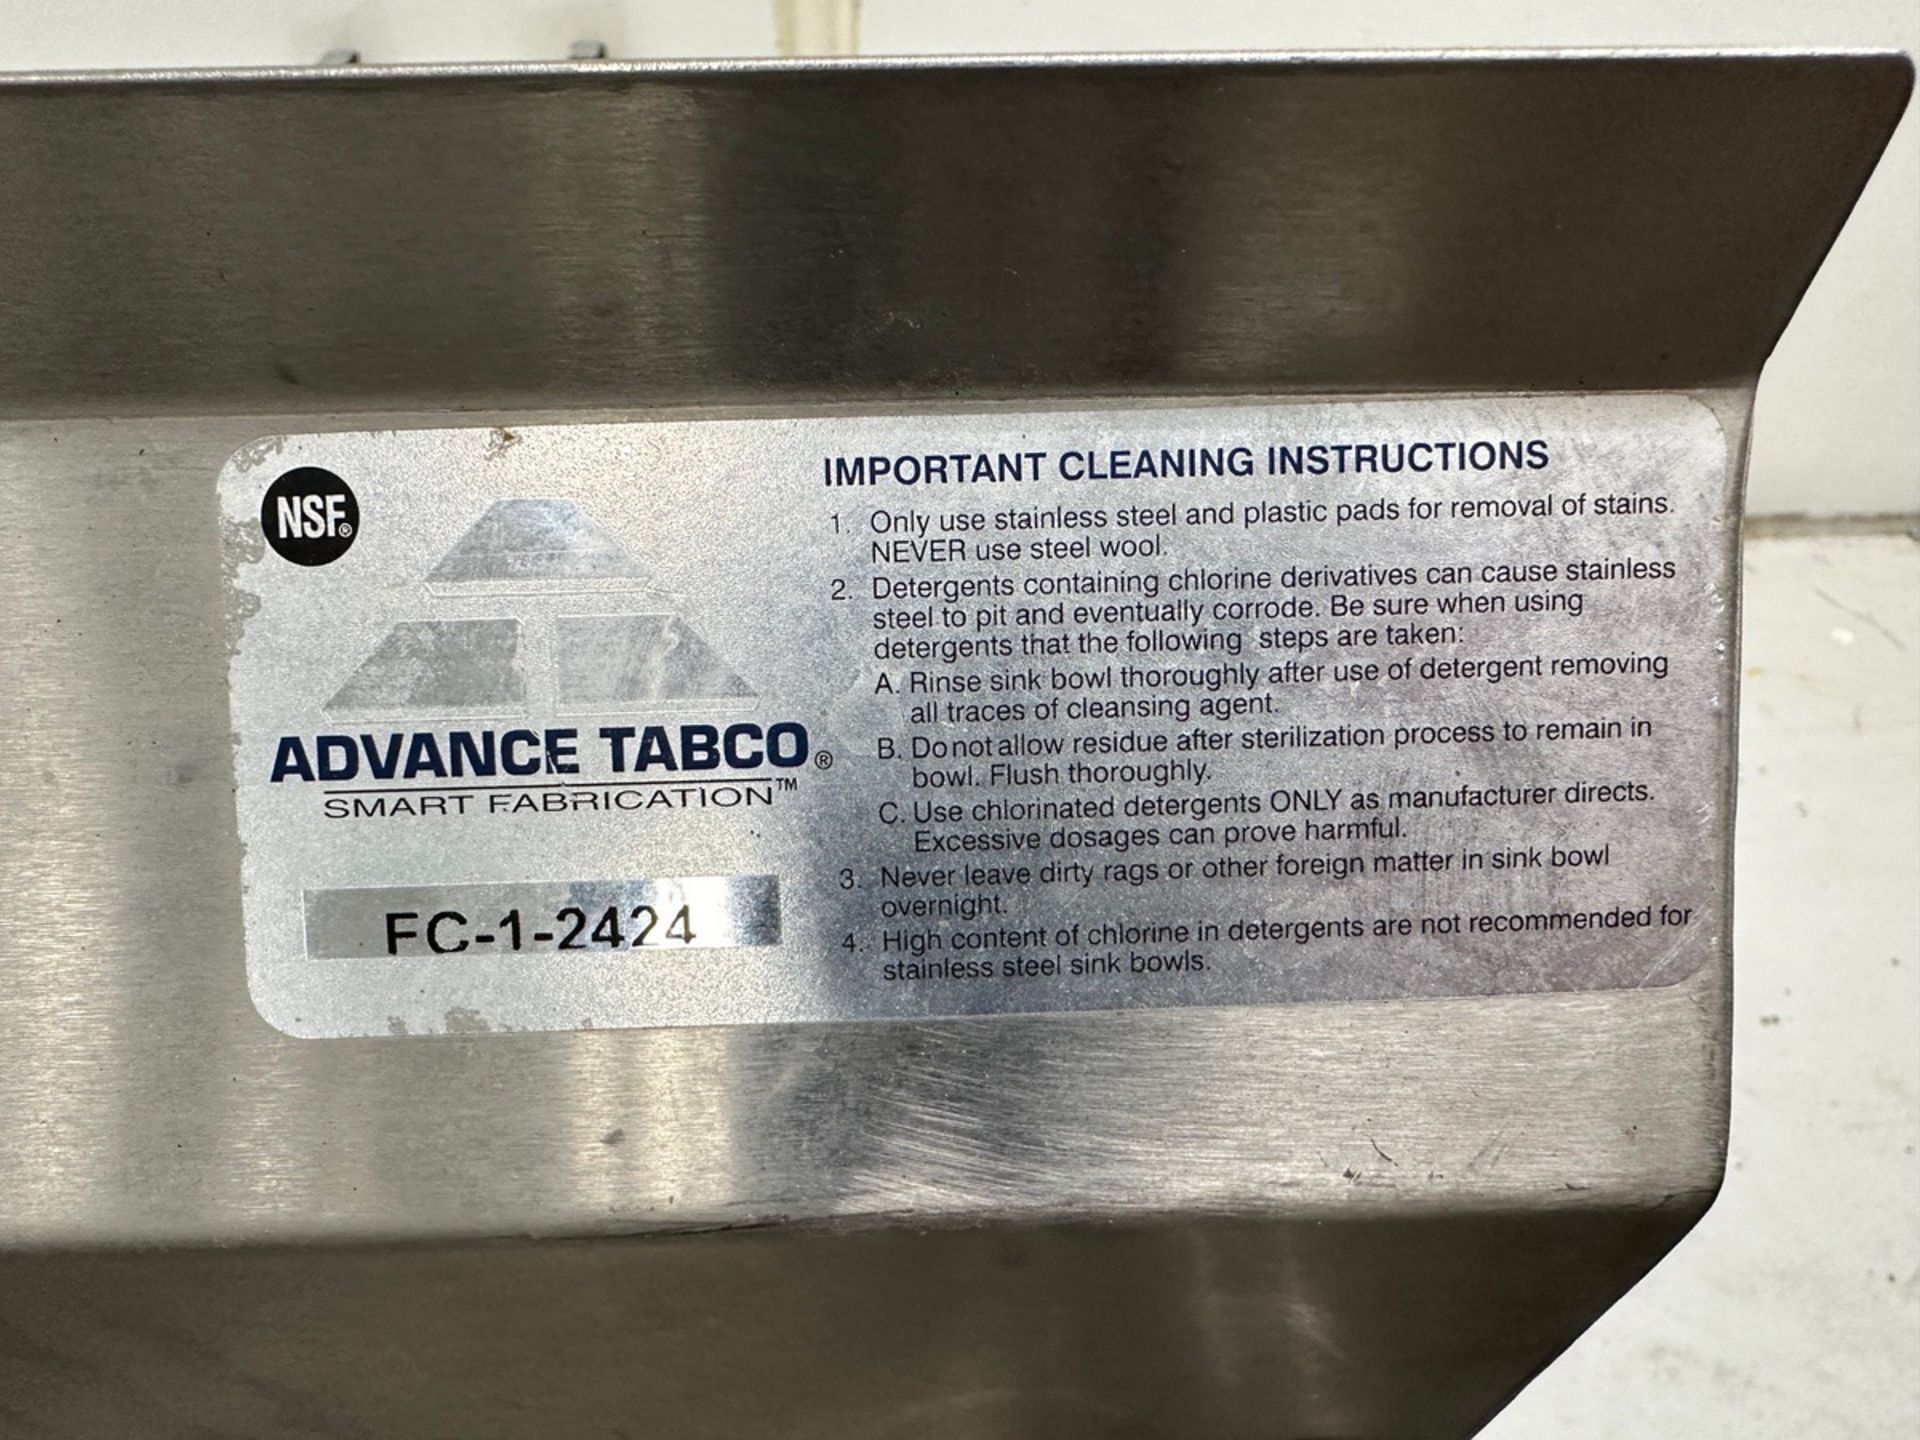 Advance Tabco Stainless Steel Utility Sink with Sprayer (Approx. 30" x 29") | Rig Fee $20 - Image 2 of 2